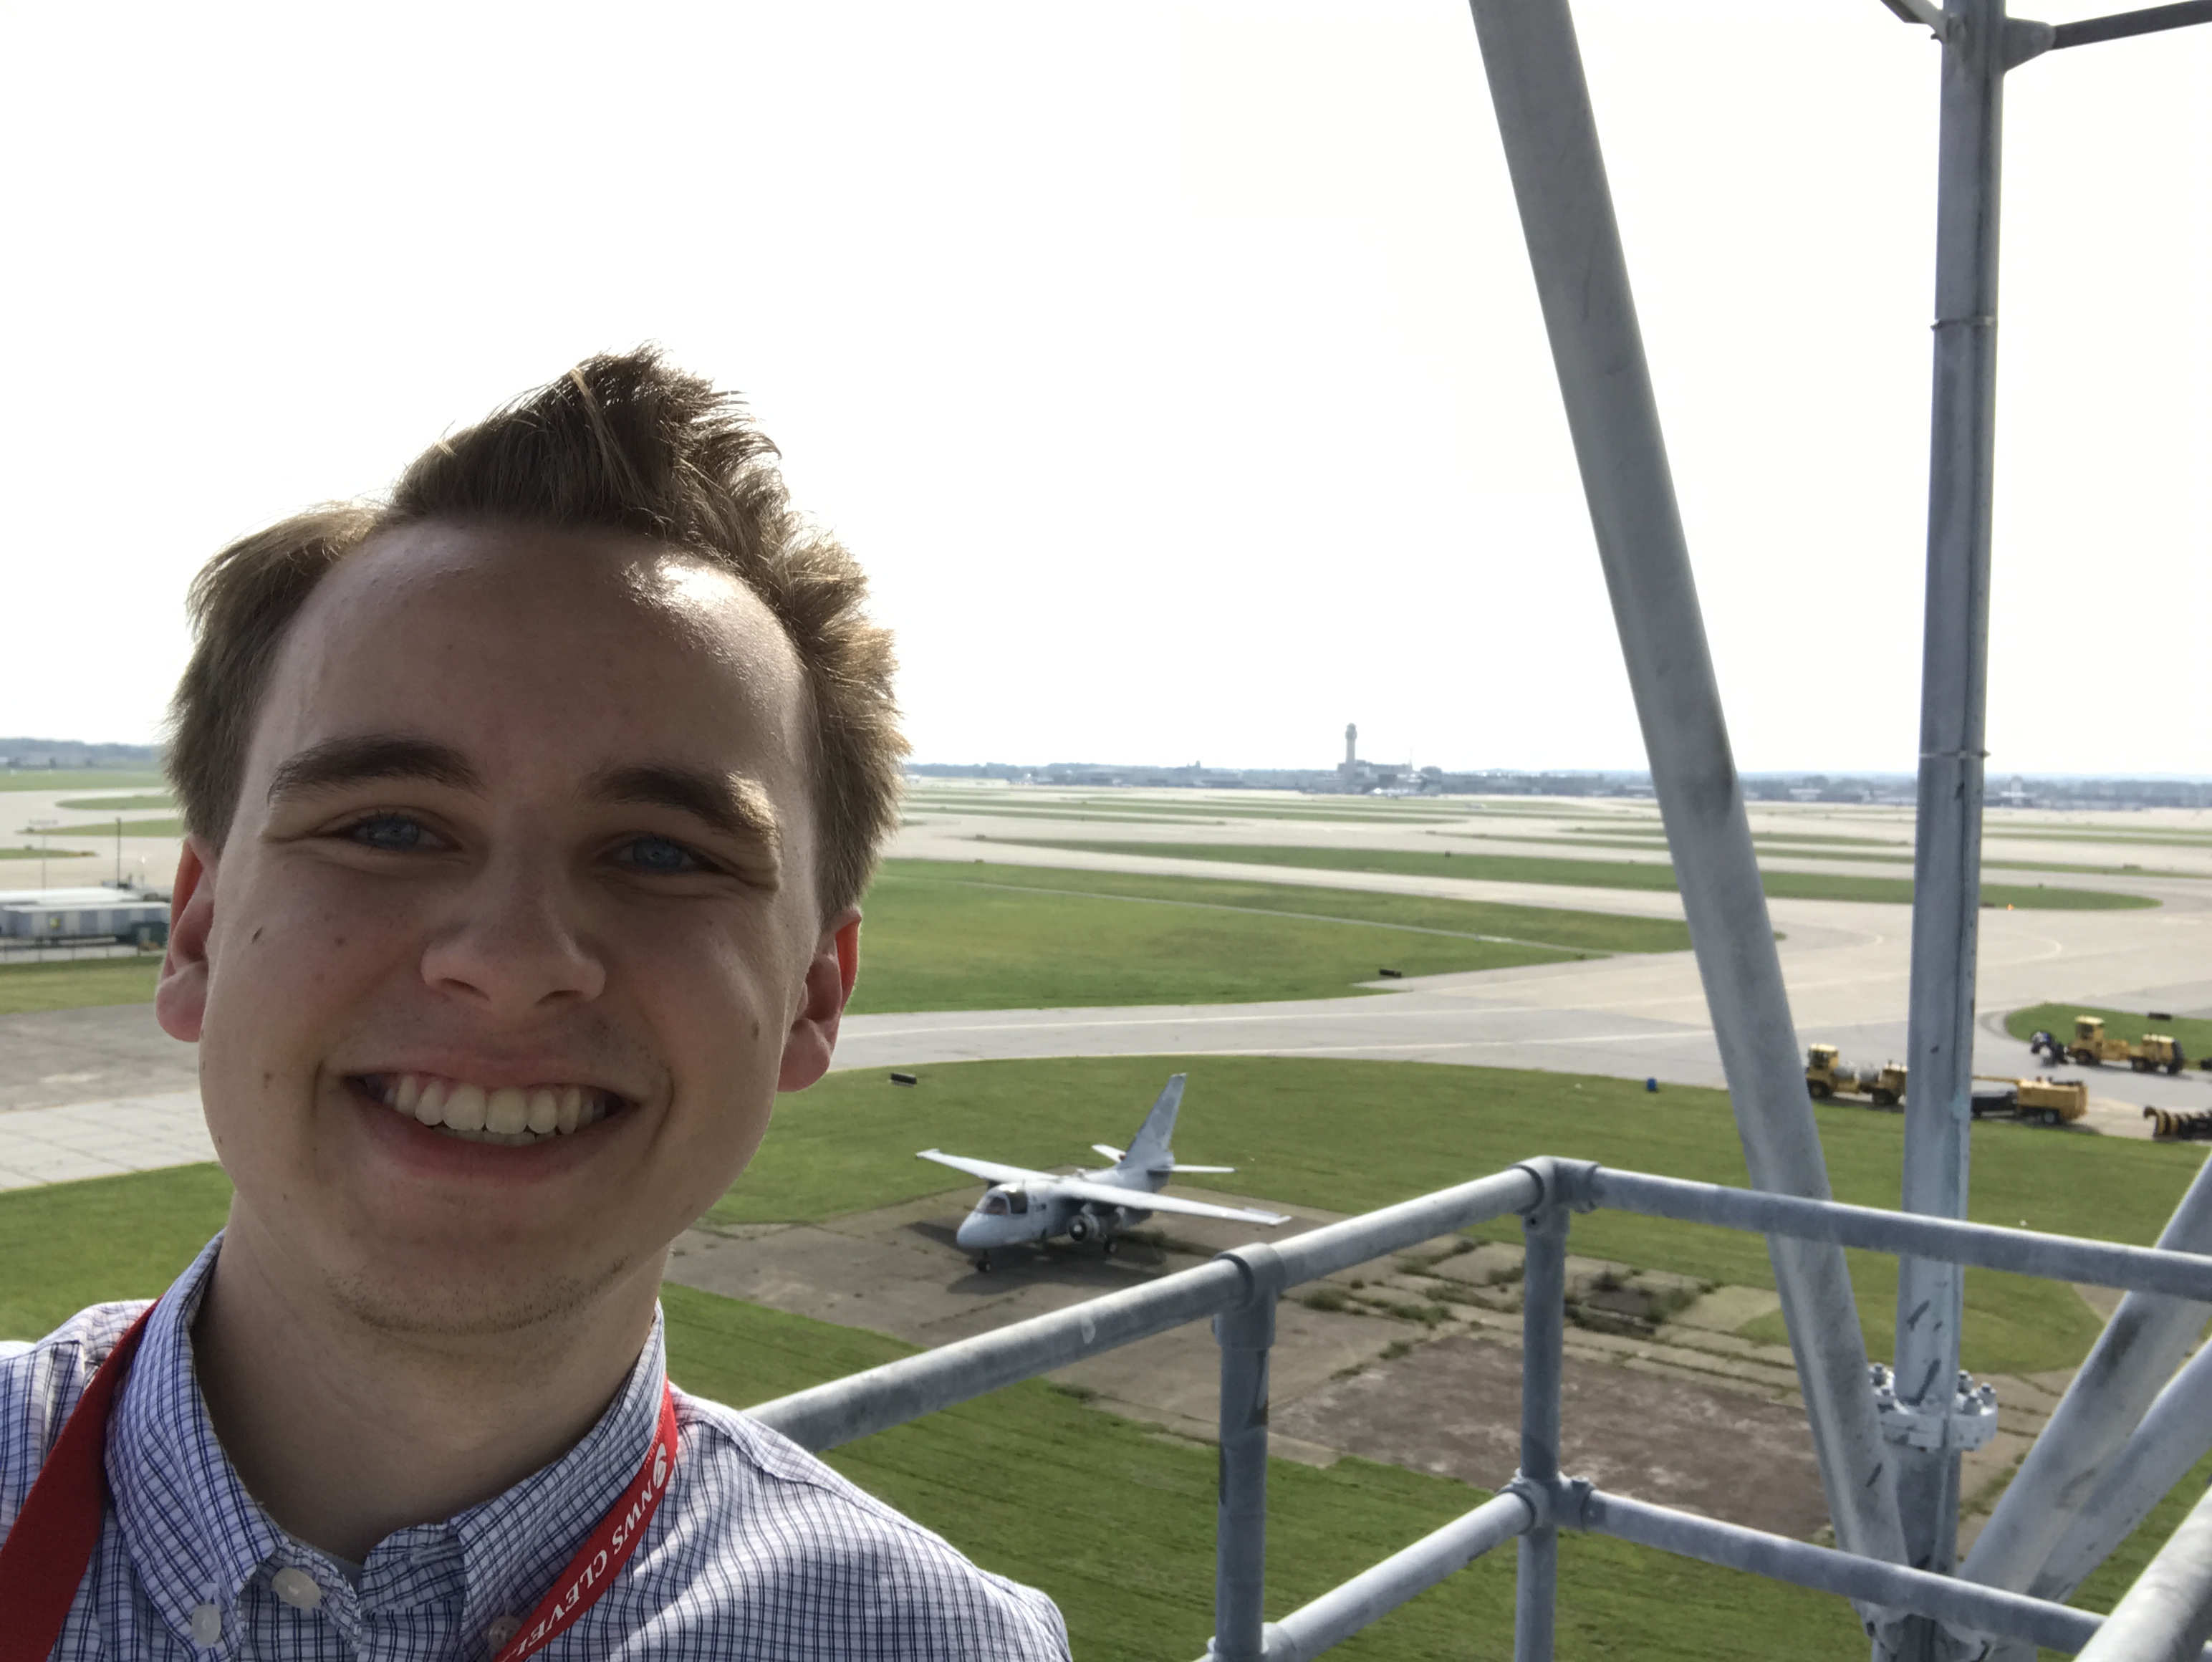 There wasn’t any snow in the summer, but National Weather Service Cleveland Forecasting Office intern Drew Koeritzer did conduct a study on how to better forecast the start times of lake effect snowstorms using archived data. Here he is halfway up the tower overlooking Cleveland Hopkins International Airport, reminding us that air travel relies on accurate weather forecasting!